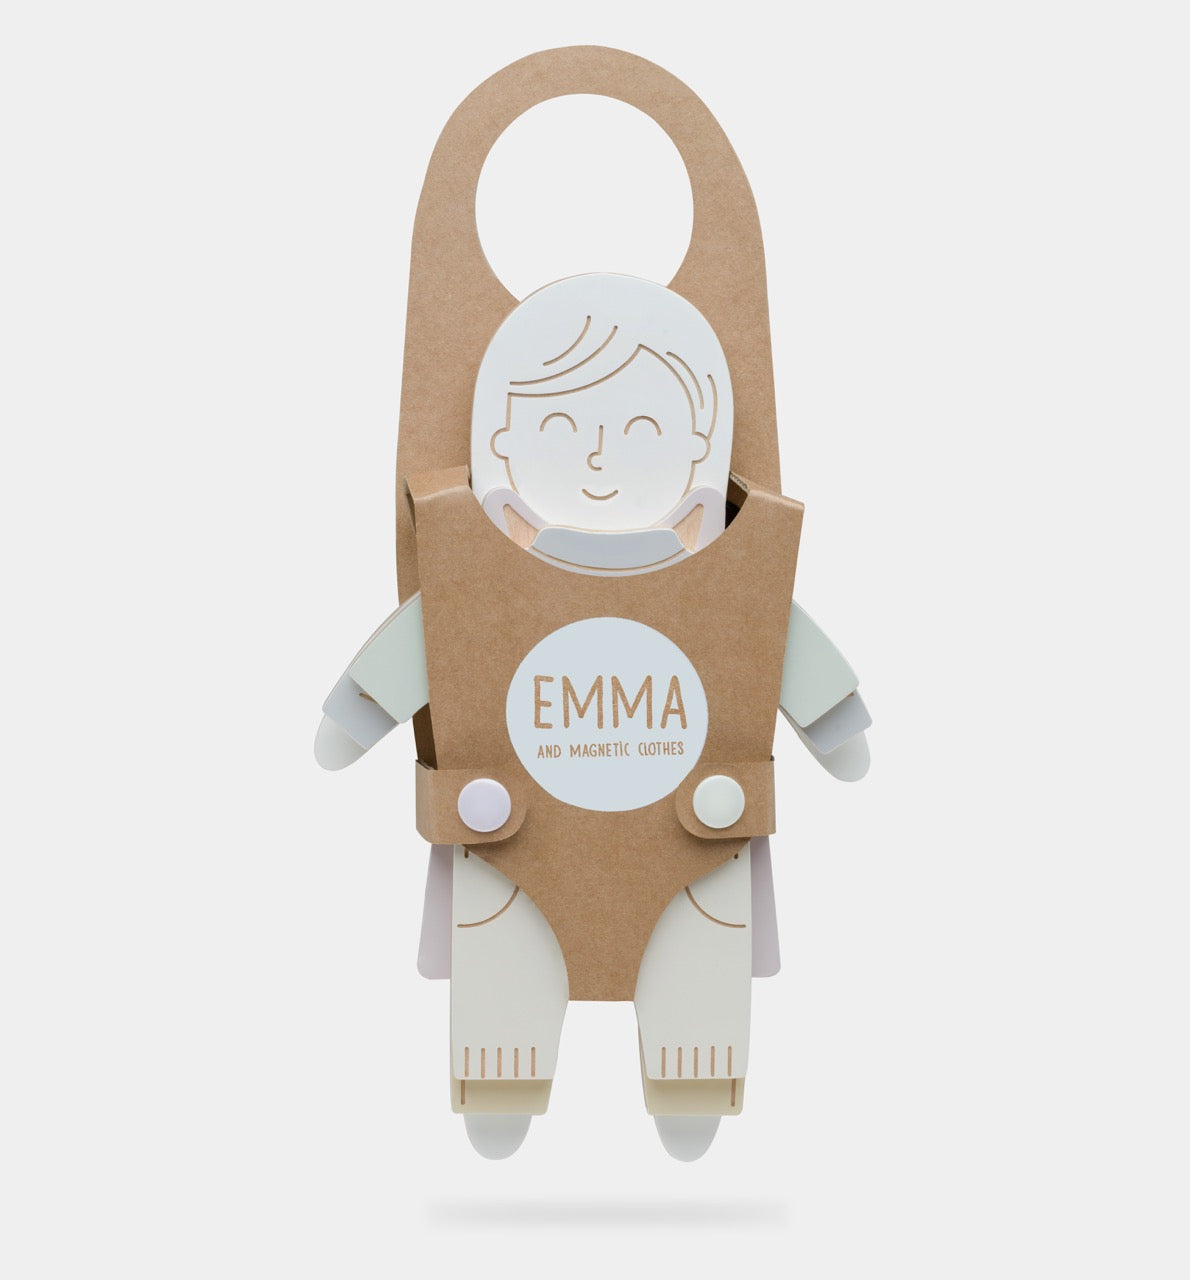 Emma the Magnetic Doll